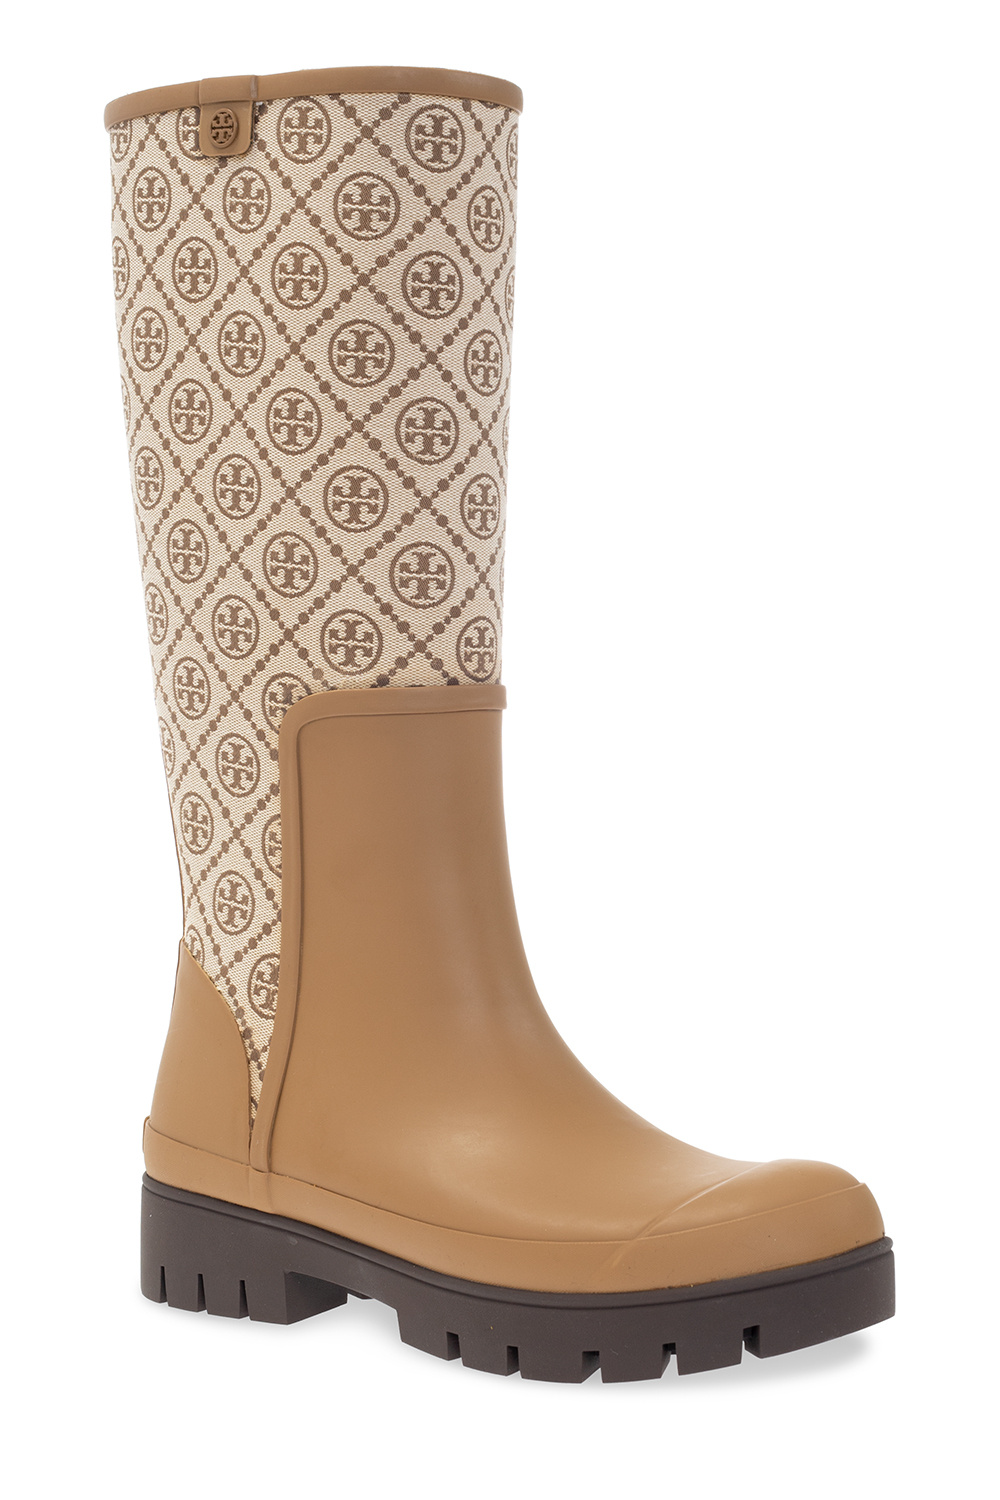 Rain boots with logo Tory Burch - sole make this one of the most comfortable  handle shoes around - IetpShops GB